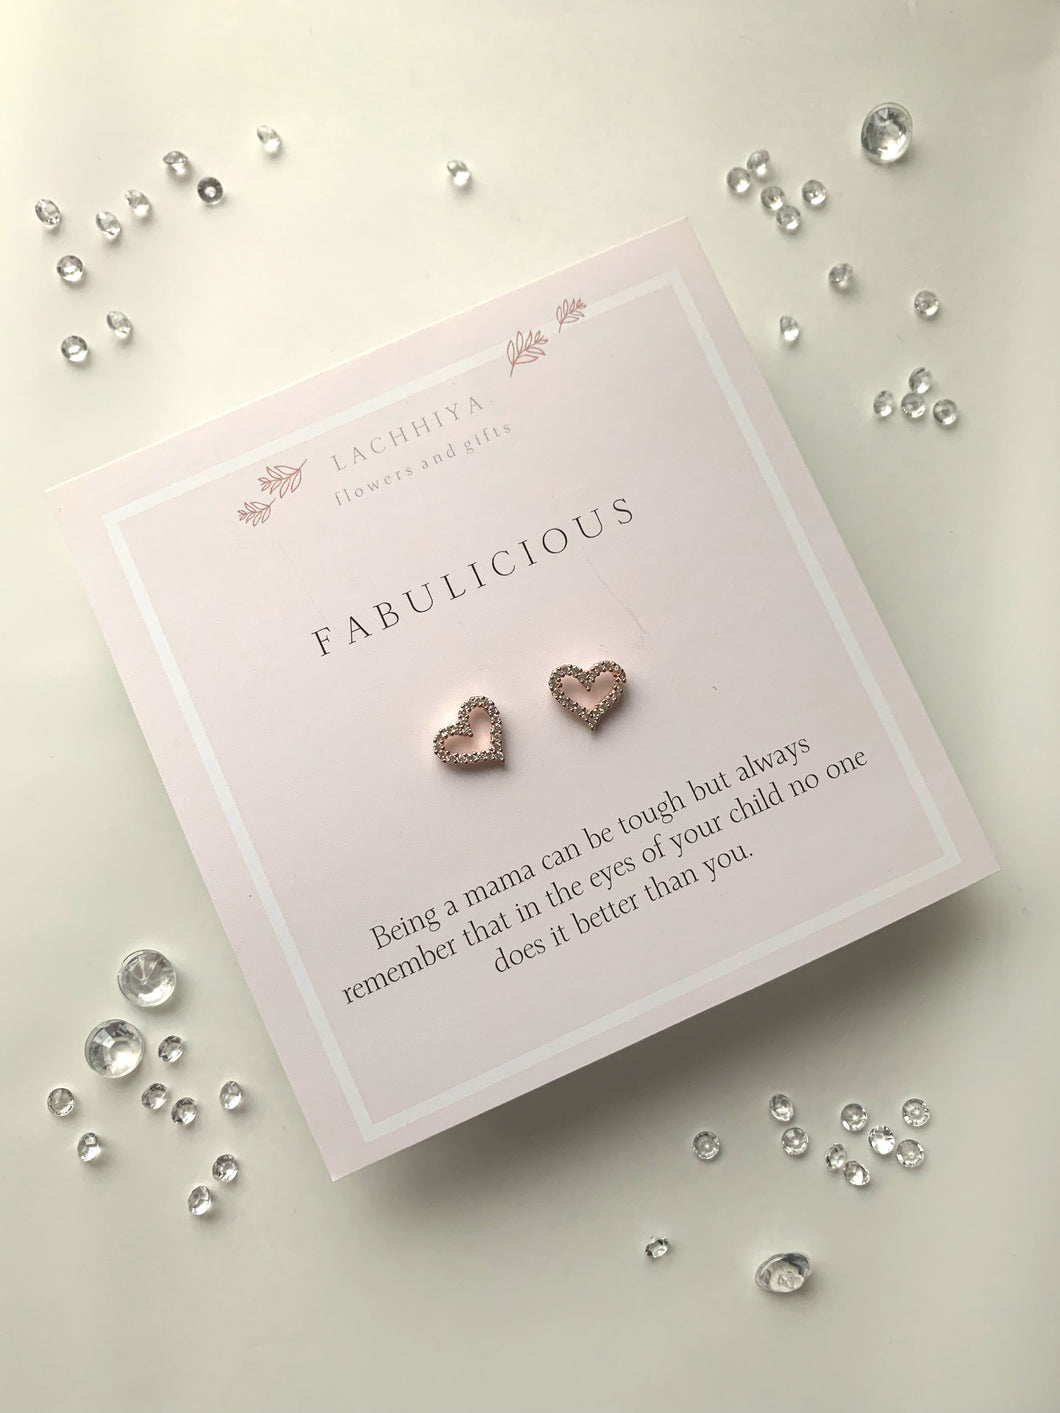 Fabulicious with heart earrings